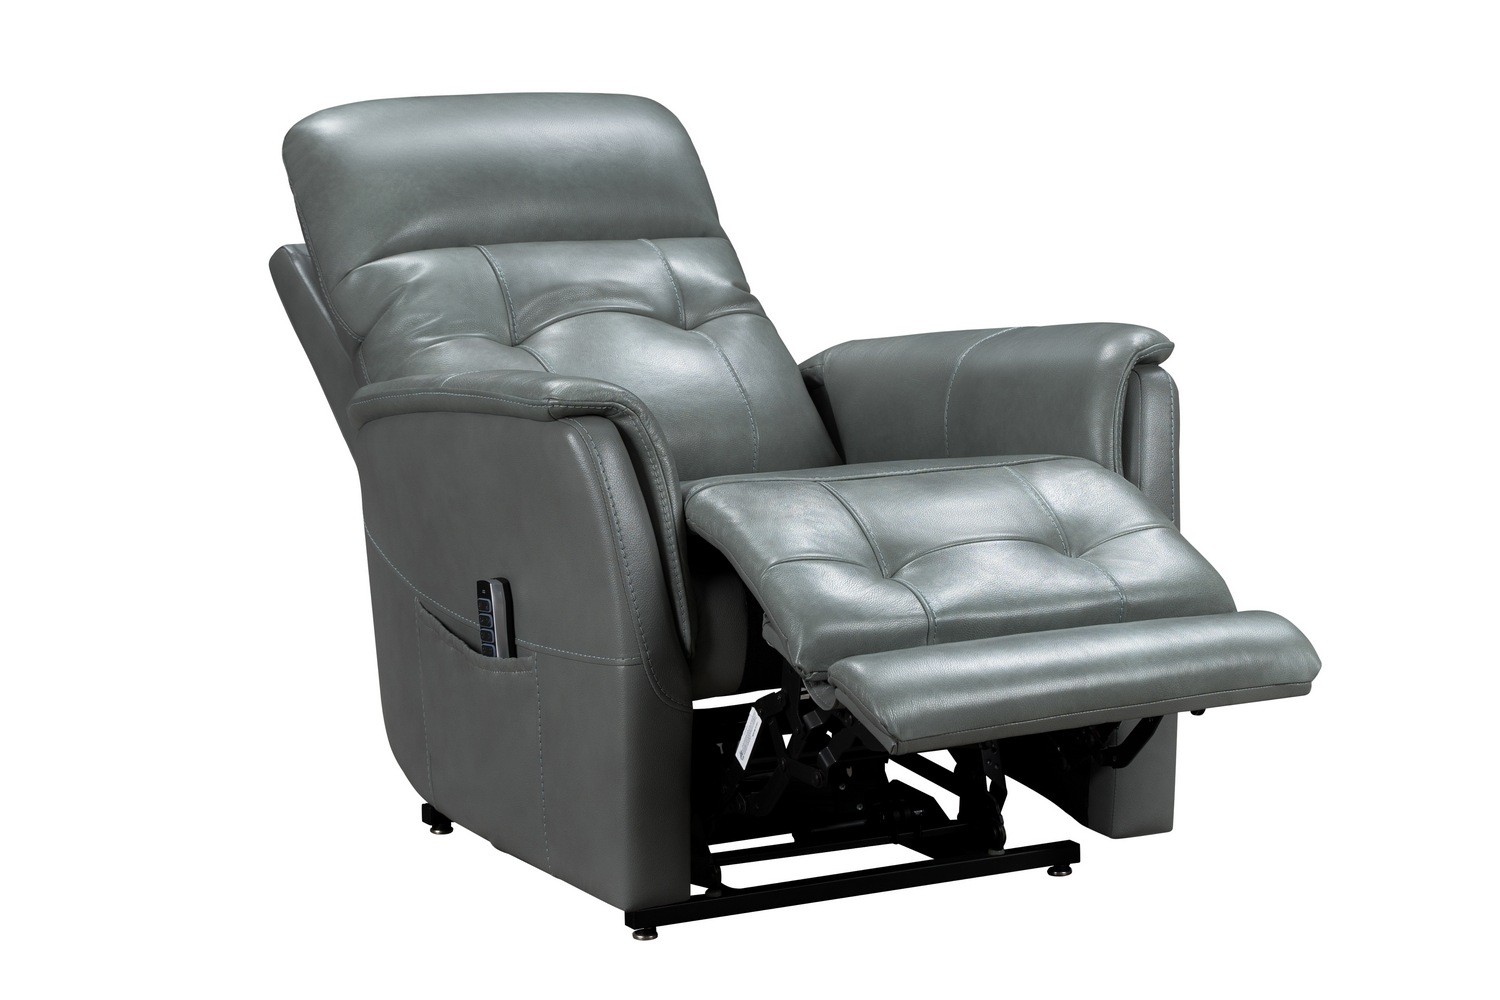 Barcalounger Livingston Lift Chair Recliner Chair with Power Head Rest, Power Lumbar and Lay Flat Mechanism - Antonio Green Gray/Leather Match